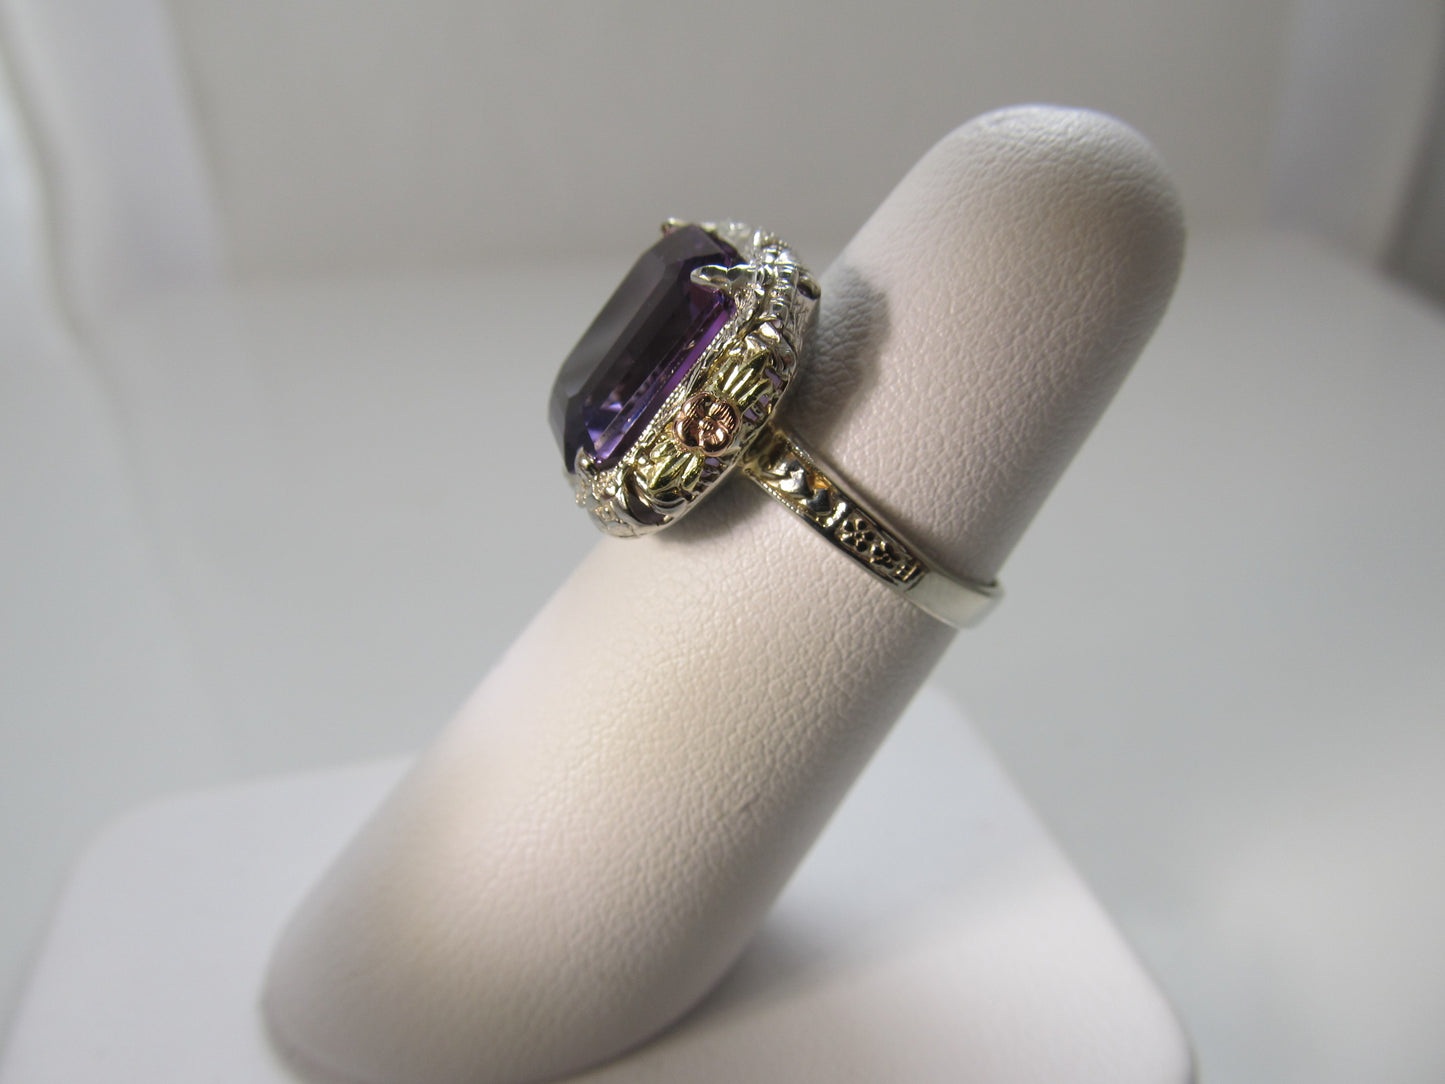 Vintage amethyst ring, 14k white, rose and yellow gold filigree